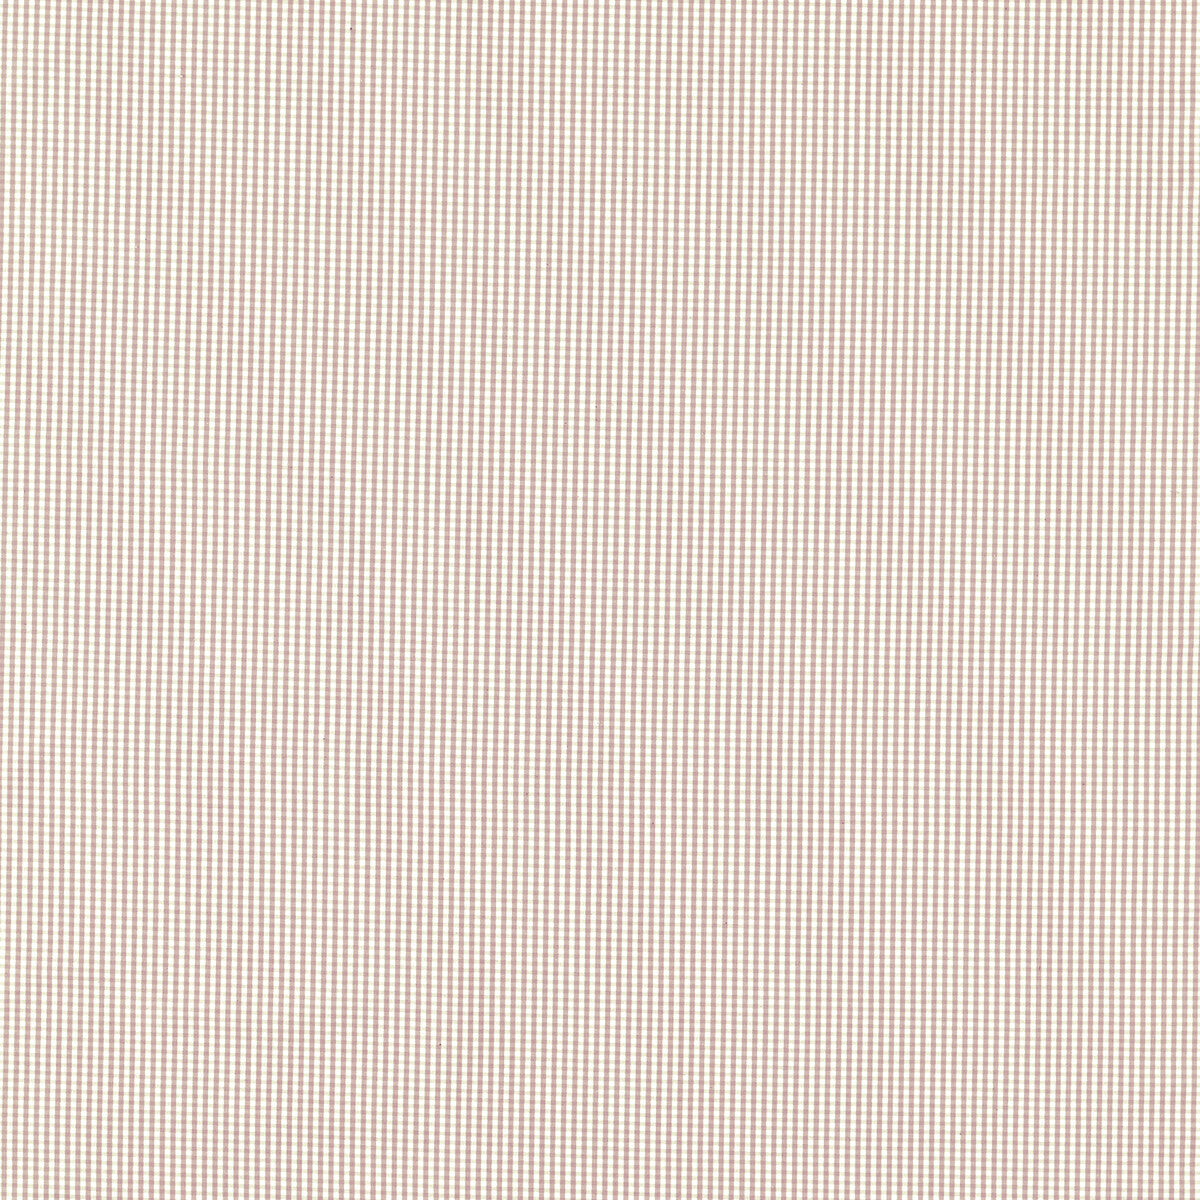 Windsor fabric in blush color - pattern F1505/01.CAC.0 - by Clarke And Clarke in the Clarke &amp; Clarke Edgeworth collection